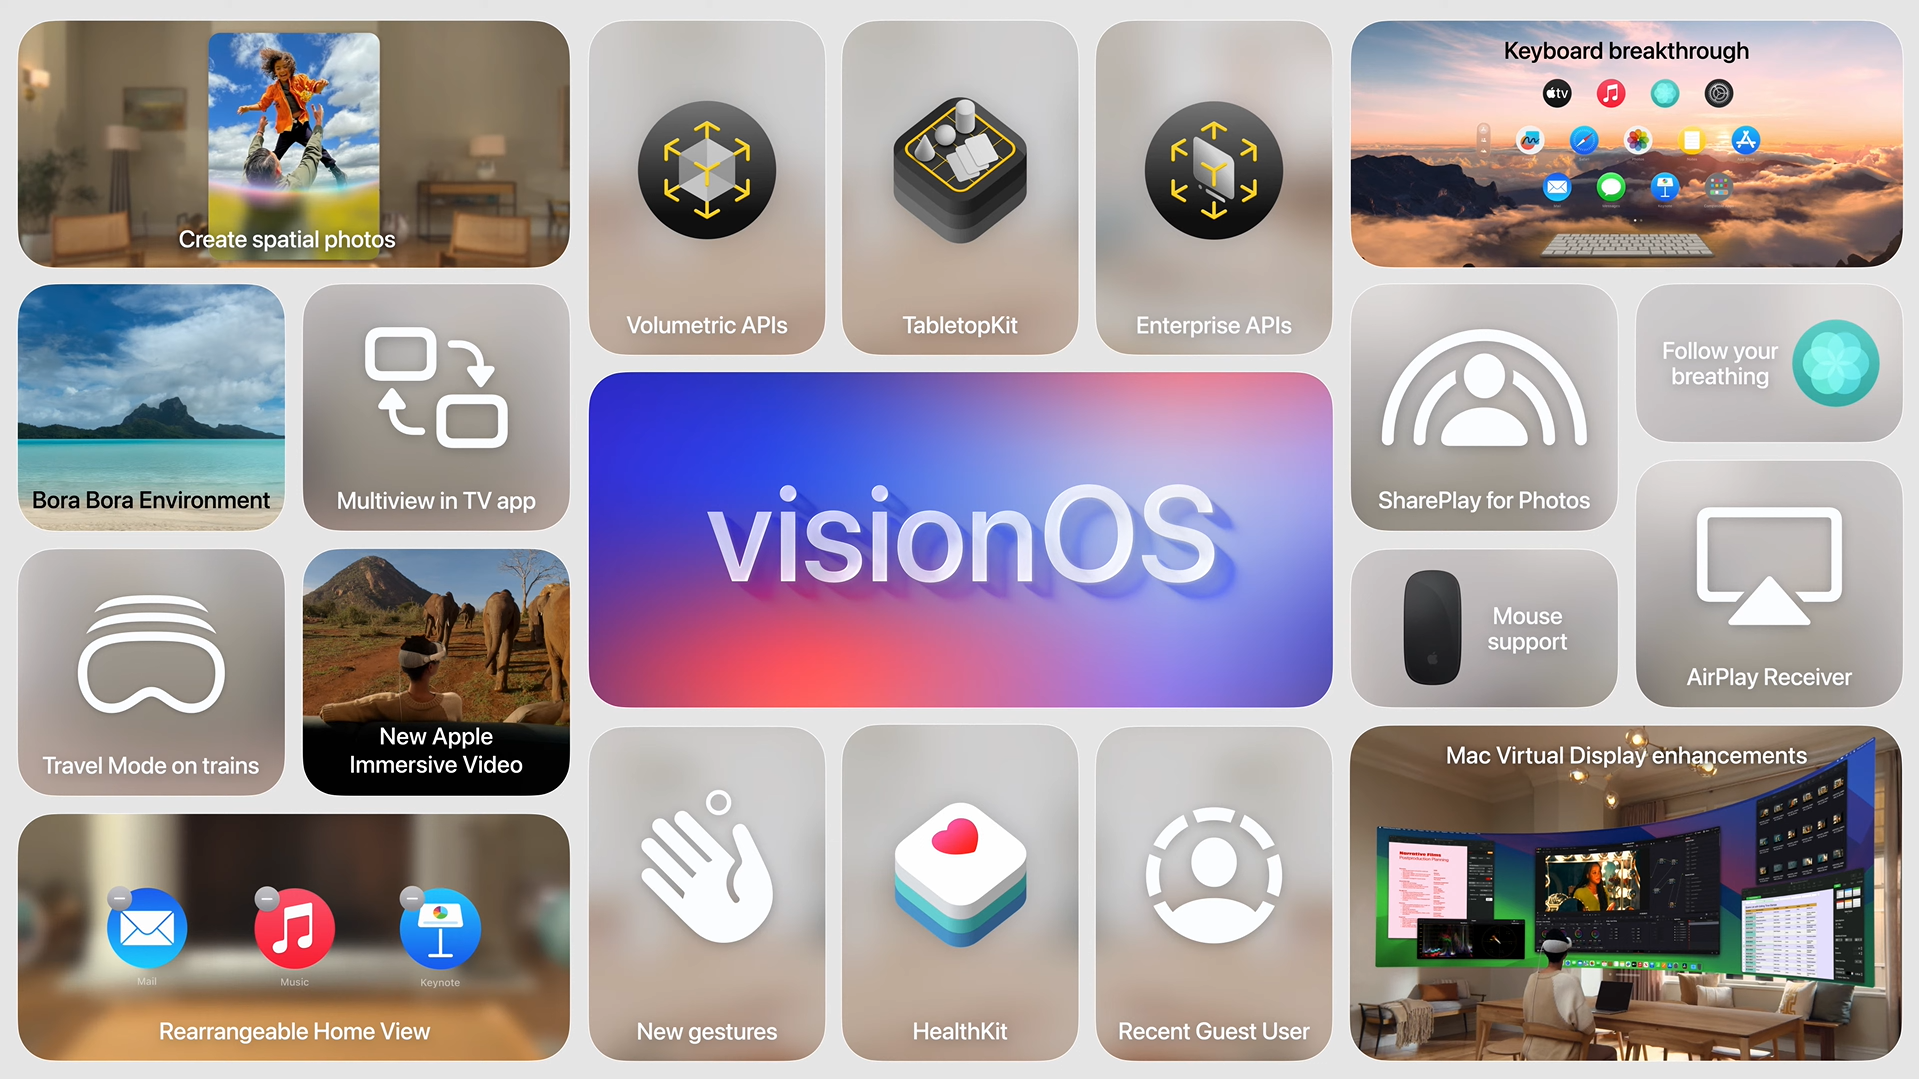 visionOS 2.0: What you need to know about the latest update